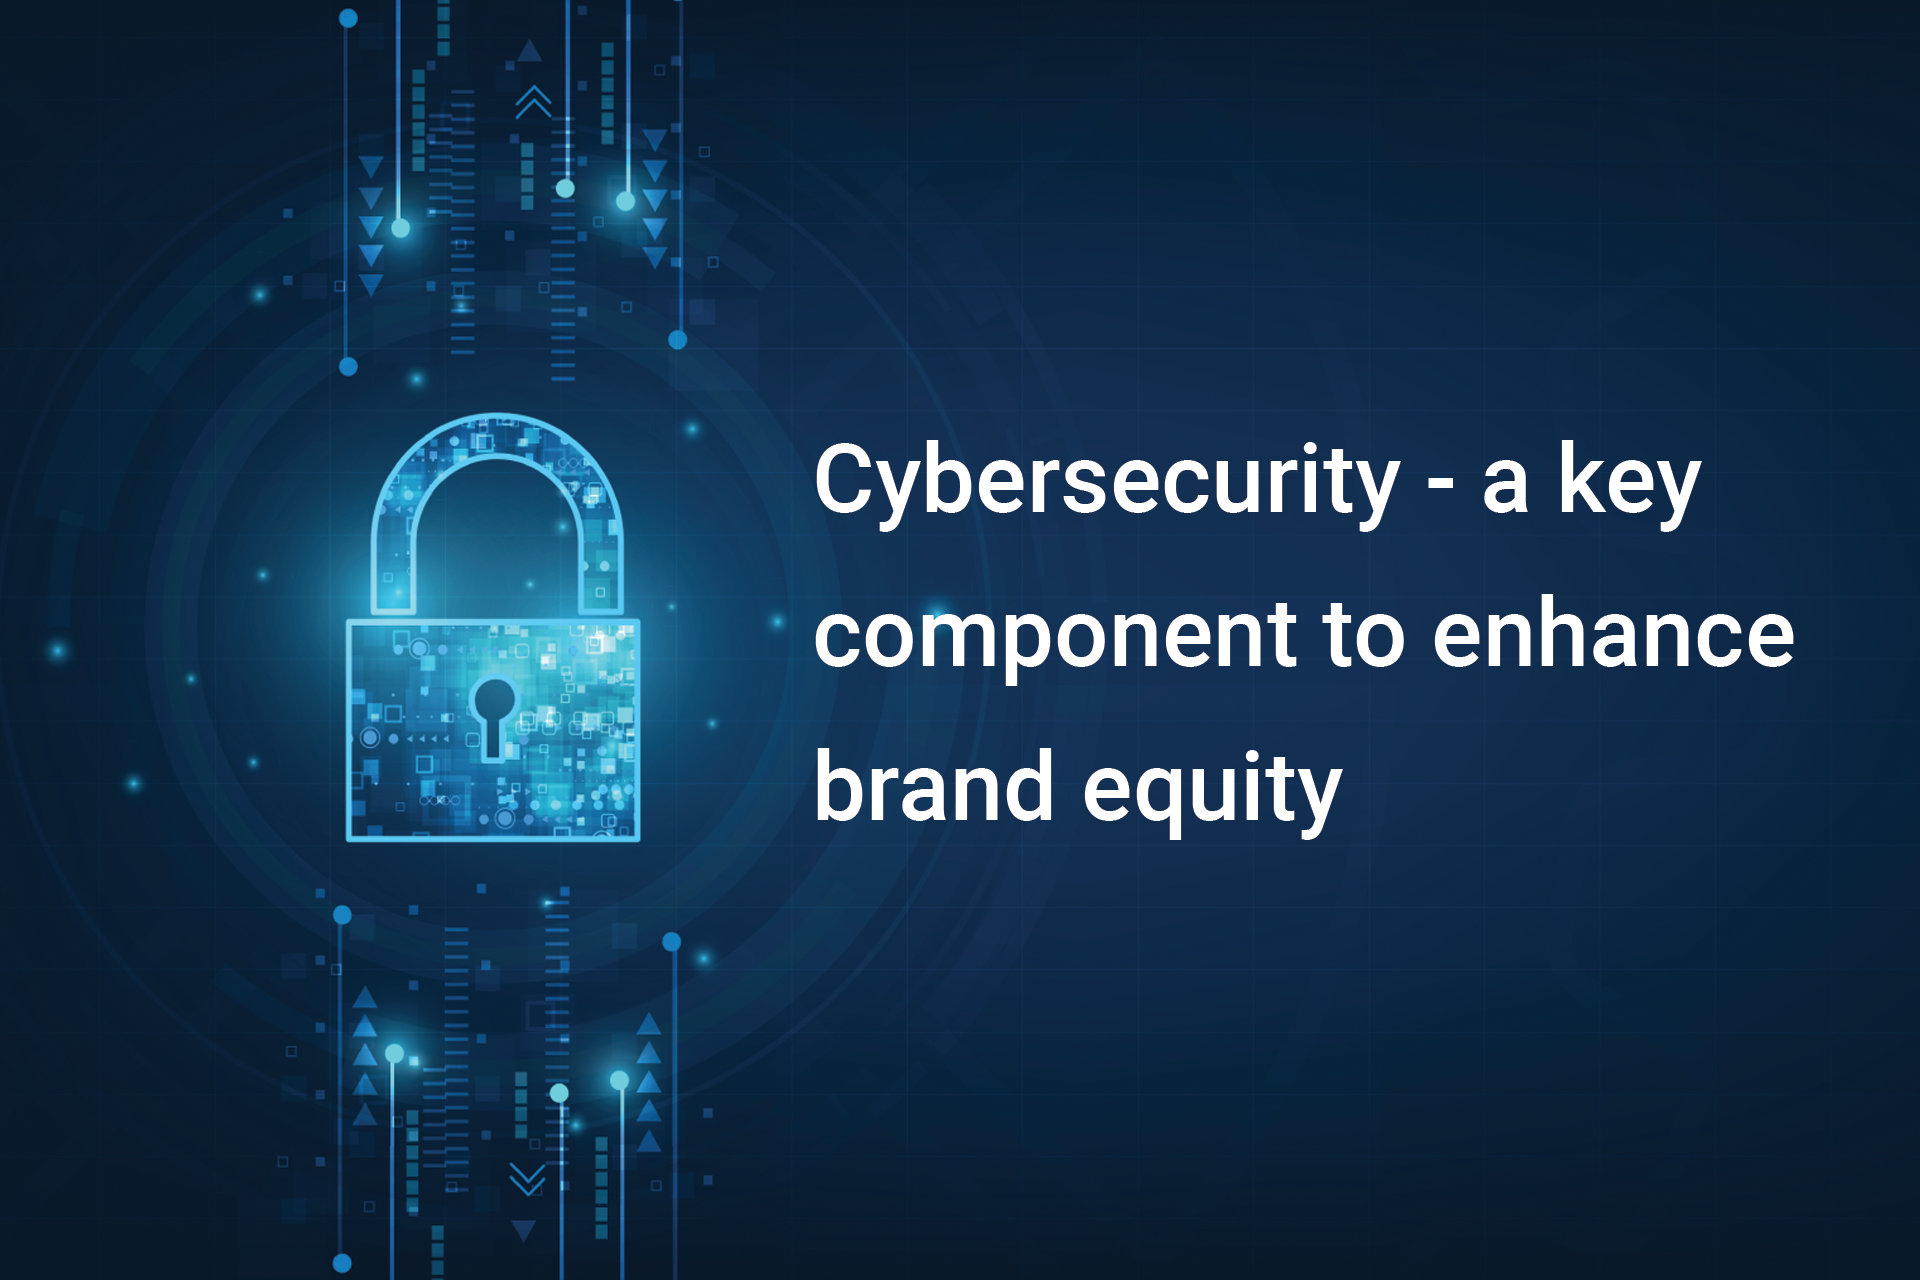 Cybersecurity – a key component to enhance brand equity